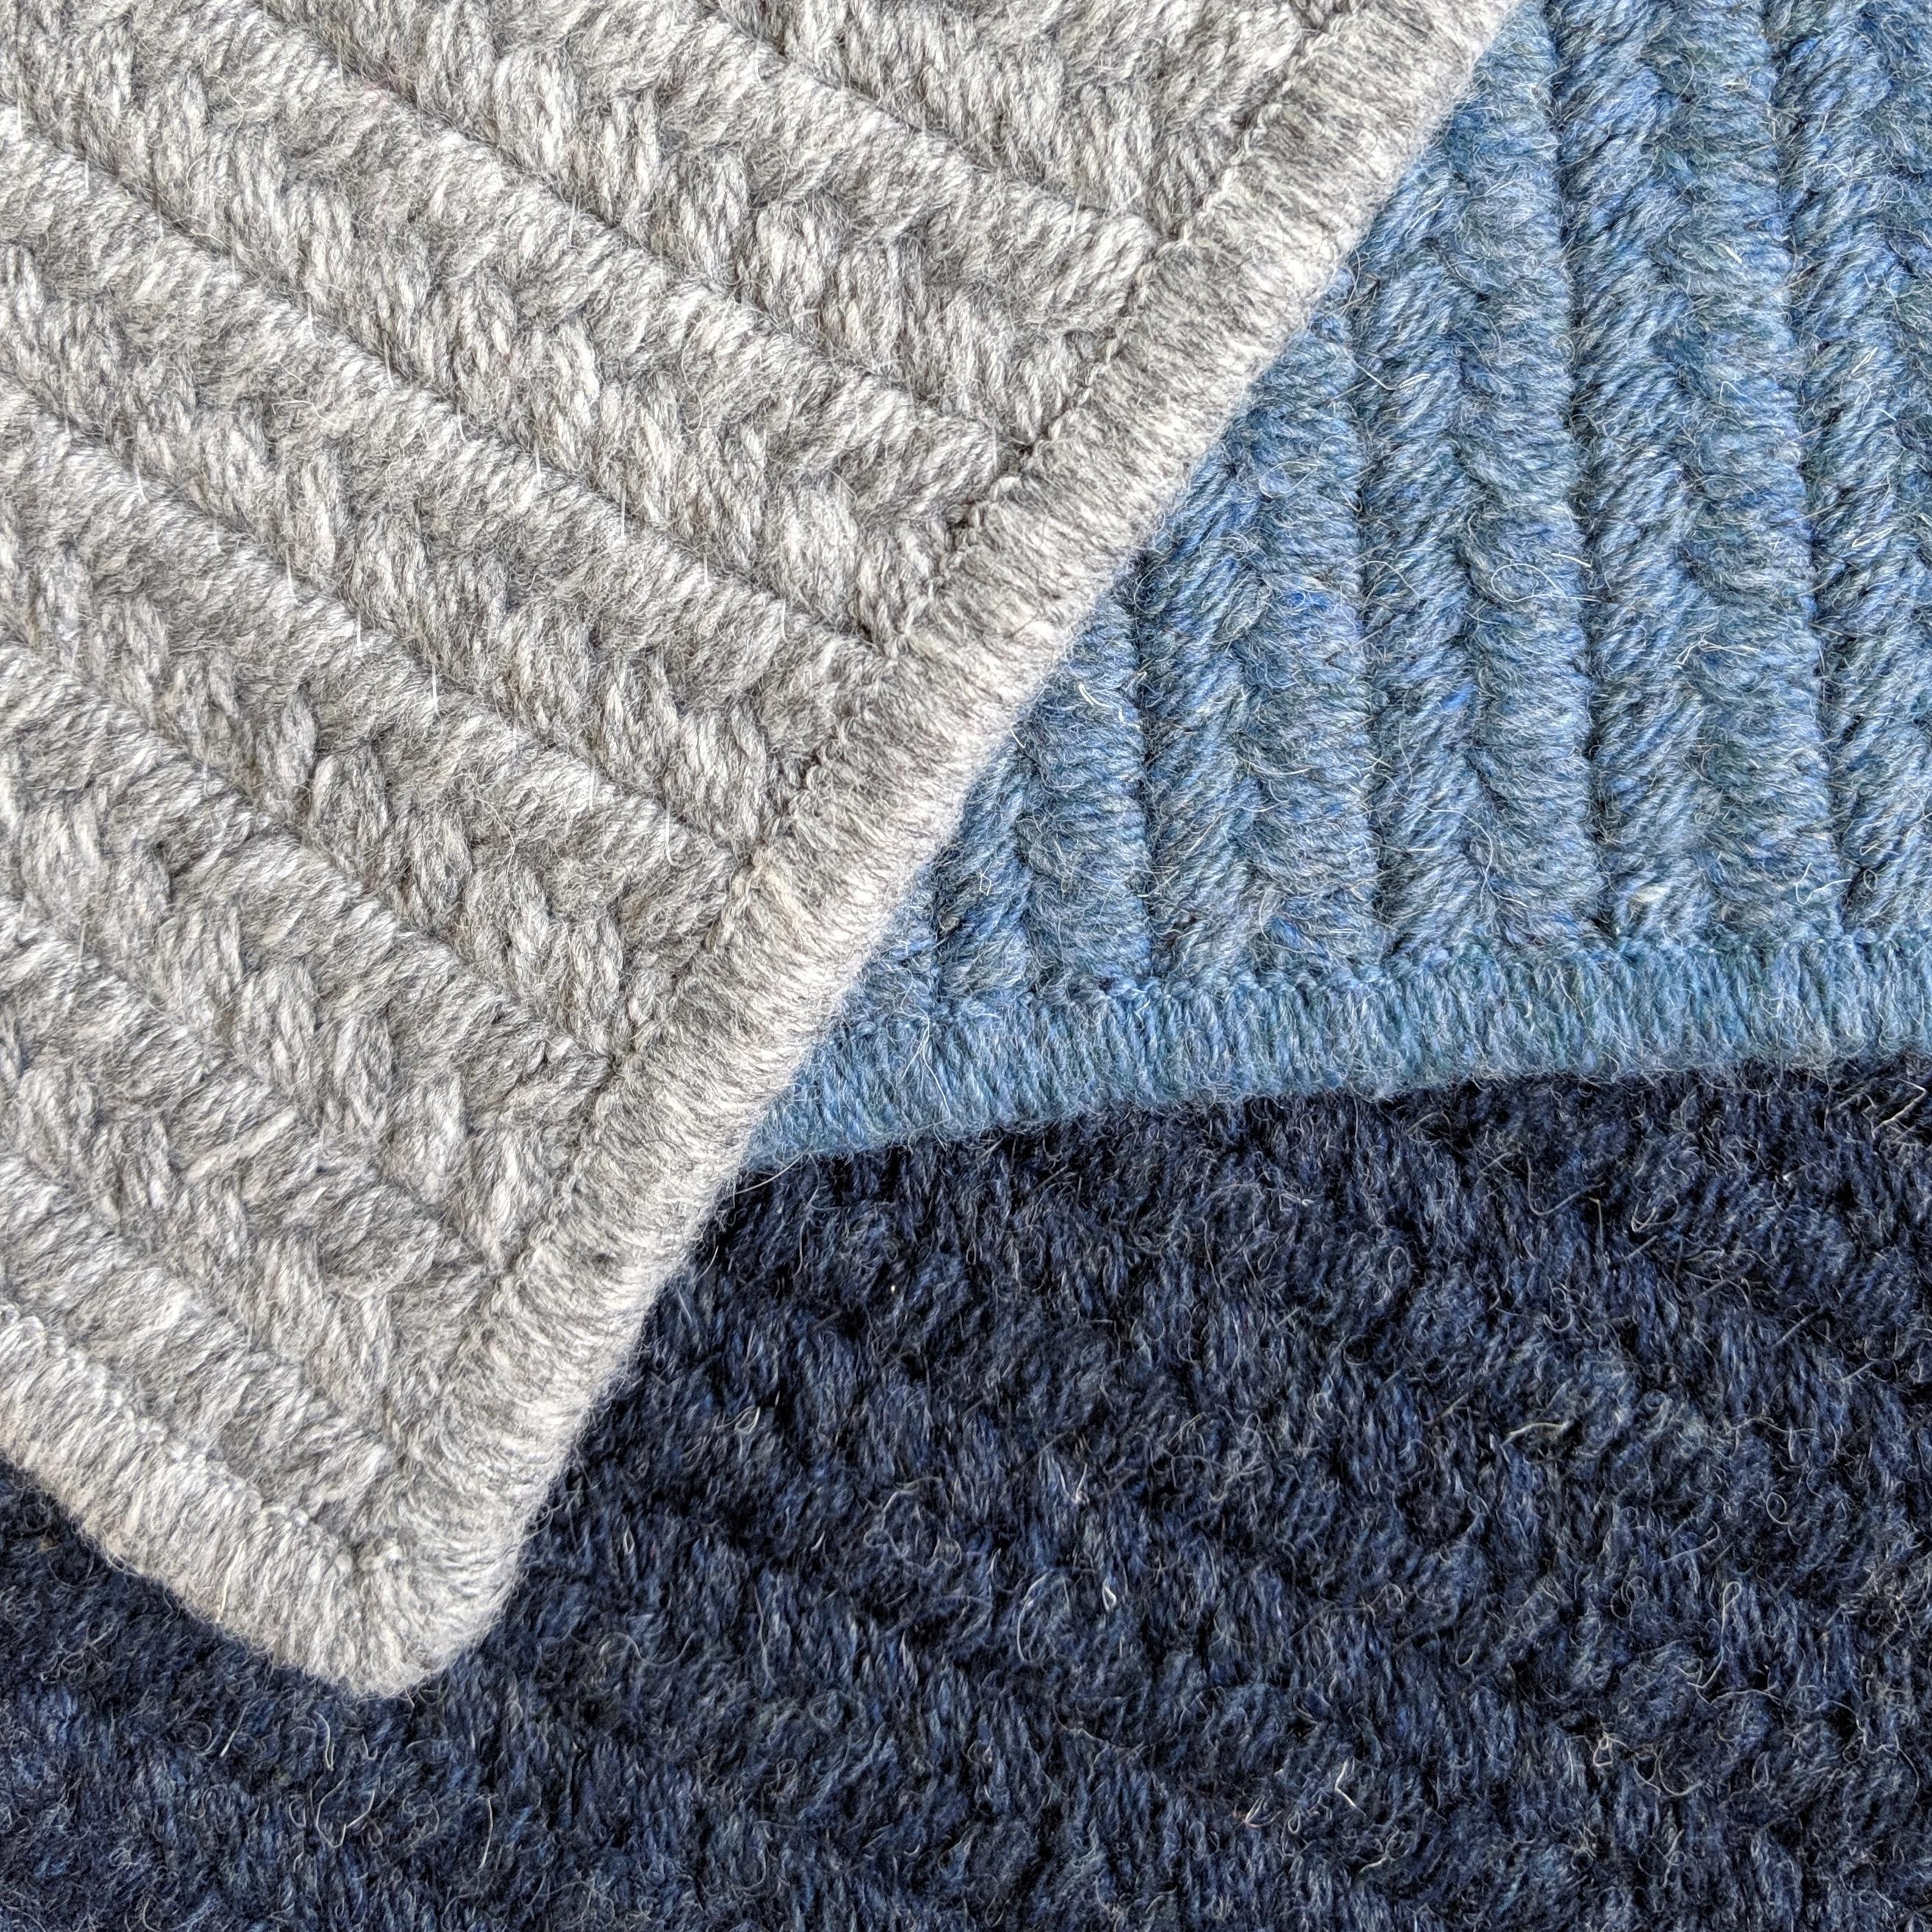 This listing is for a 8 x 10 rug in the colors shown in the first image plus a rug pad for use on hard surfaces.

We offer a number of different colors. We can mix colors akin to the rug photographed or the rug can be produced out of a single color.